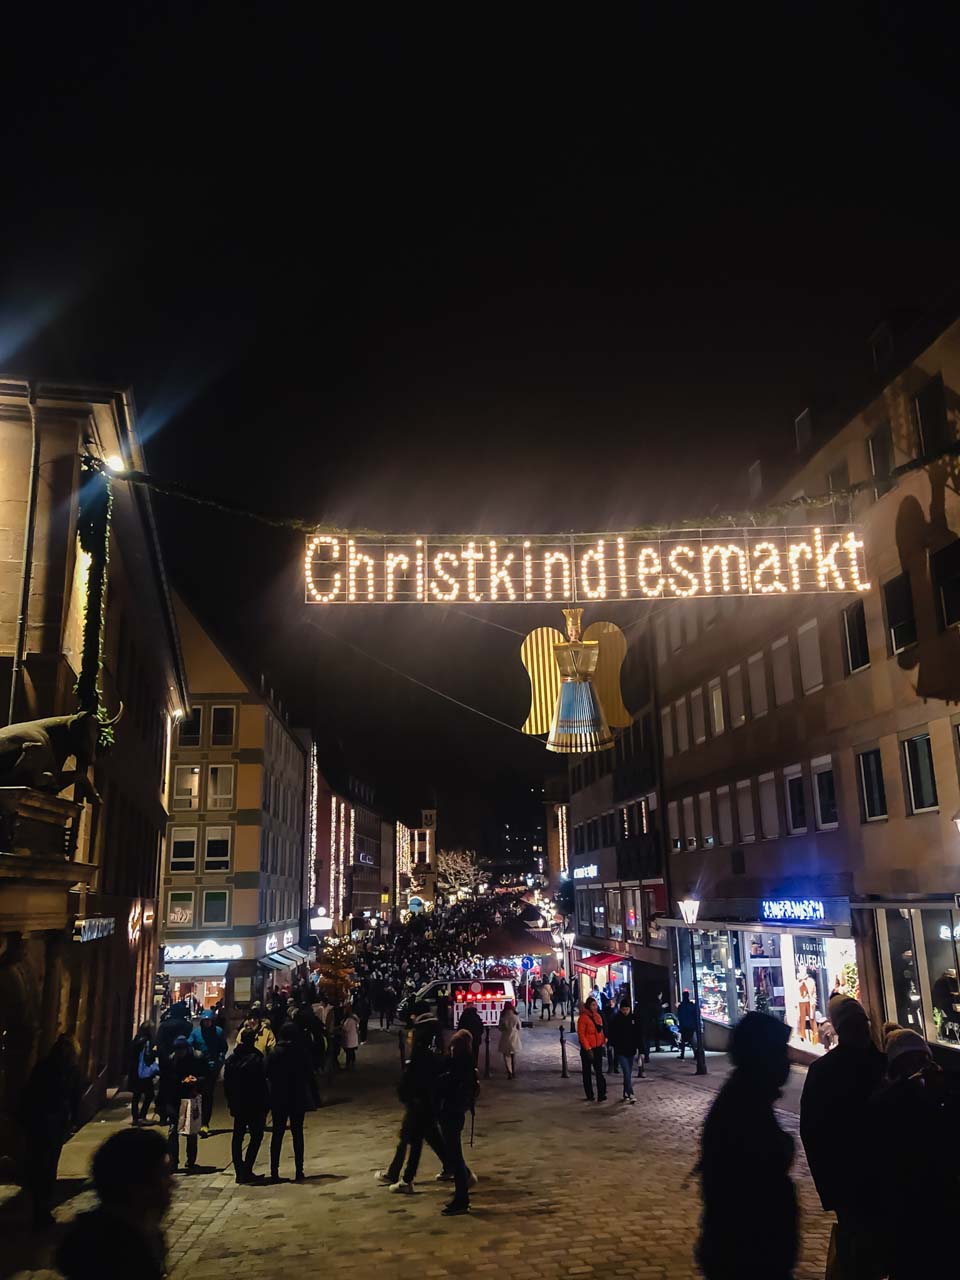 The iconic 'Christkindlesmarkt' sign lit up above a busy street at night, marking the entrance to the Nuremberg Christmas Market